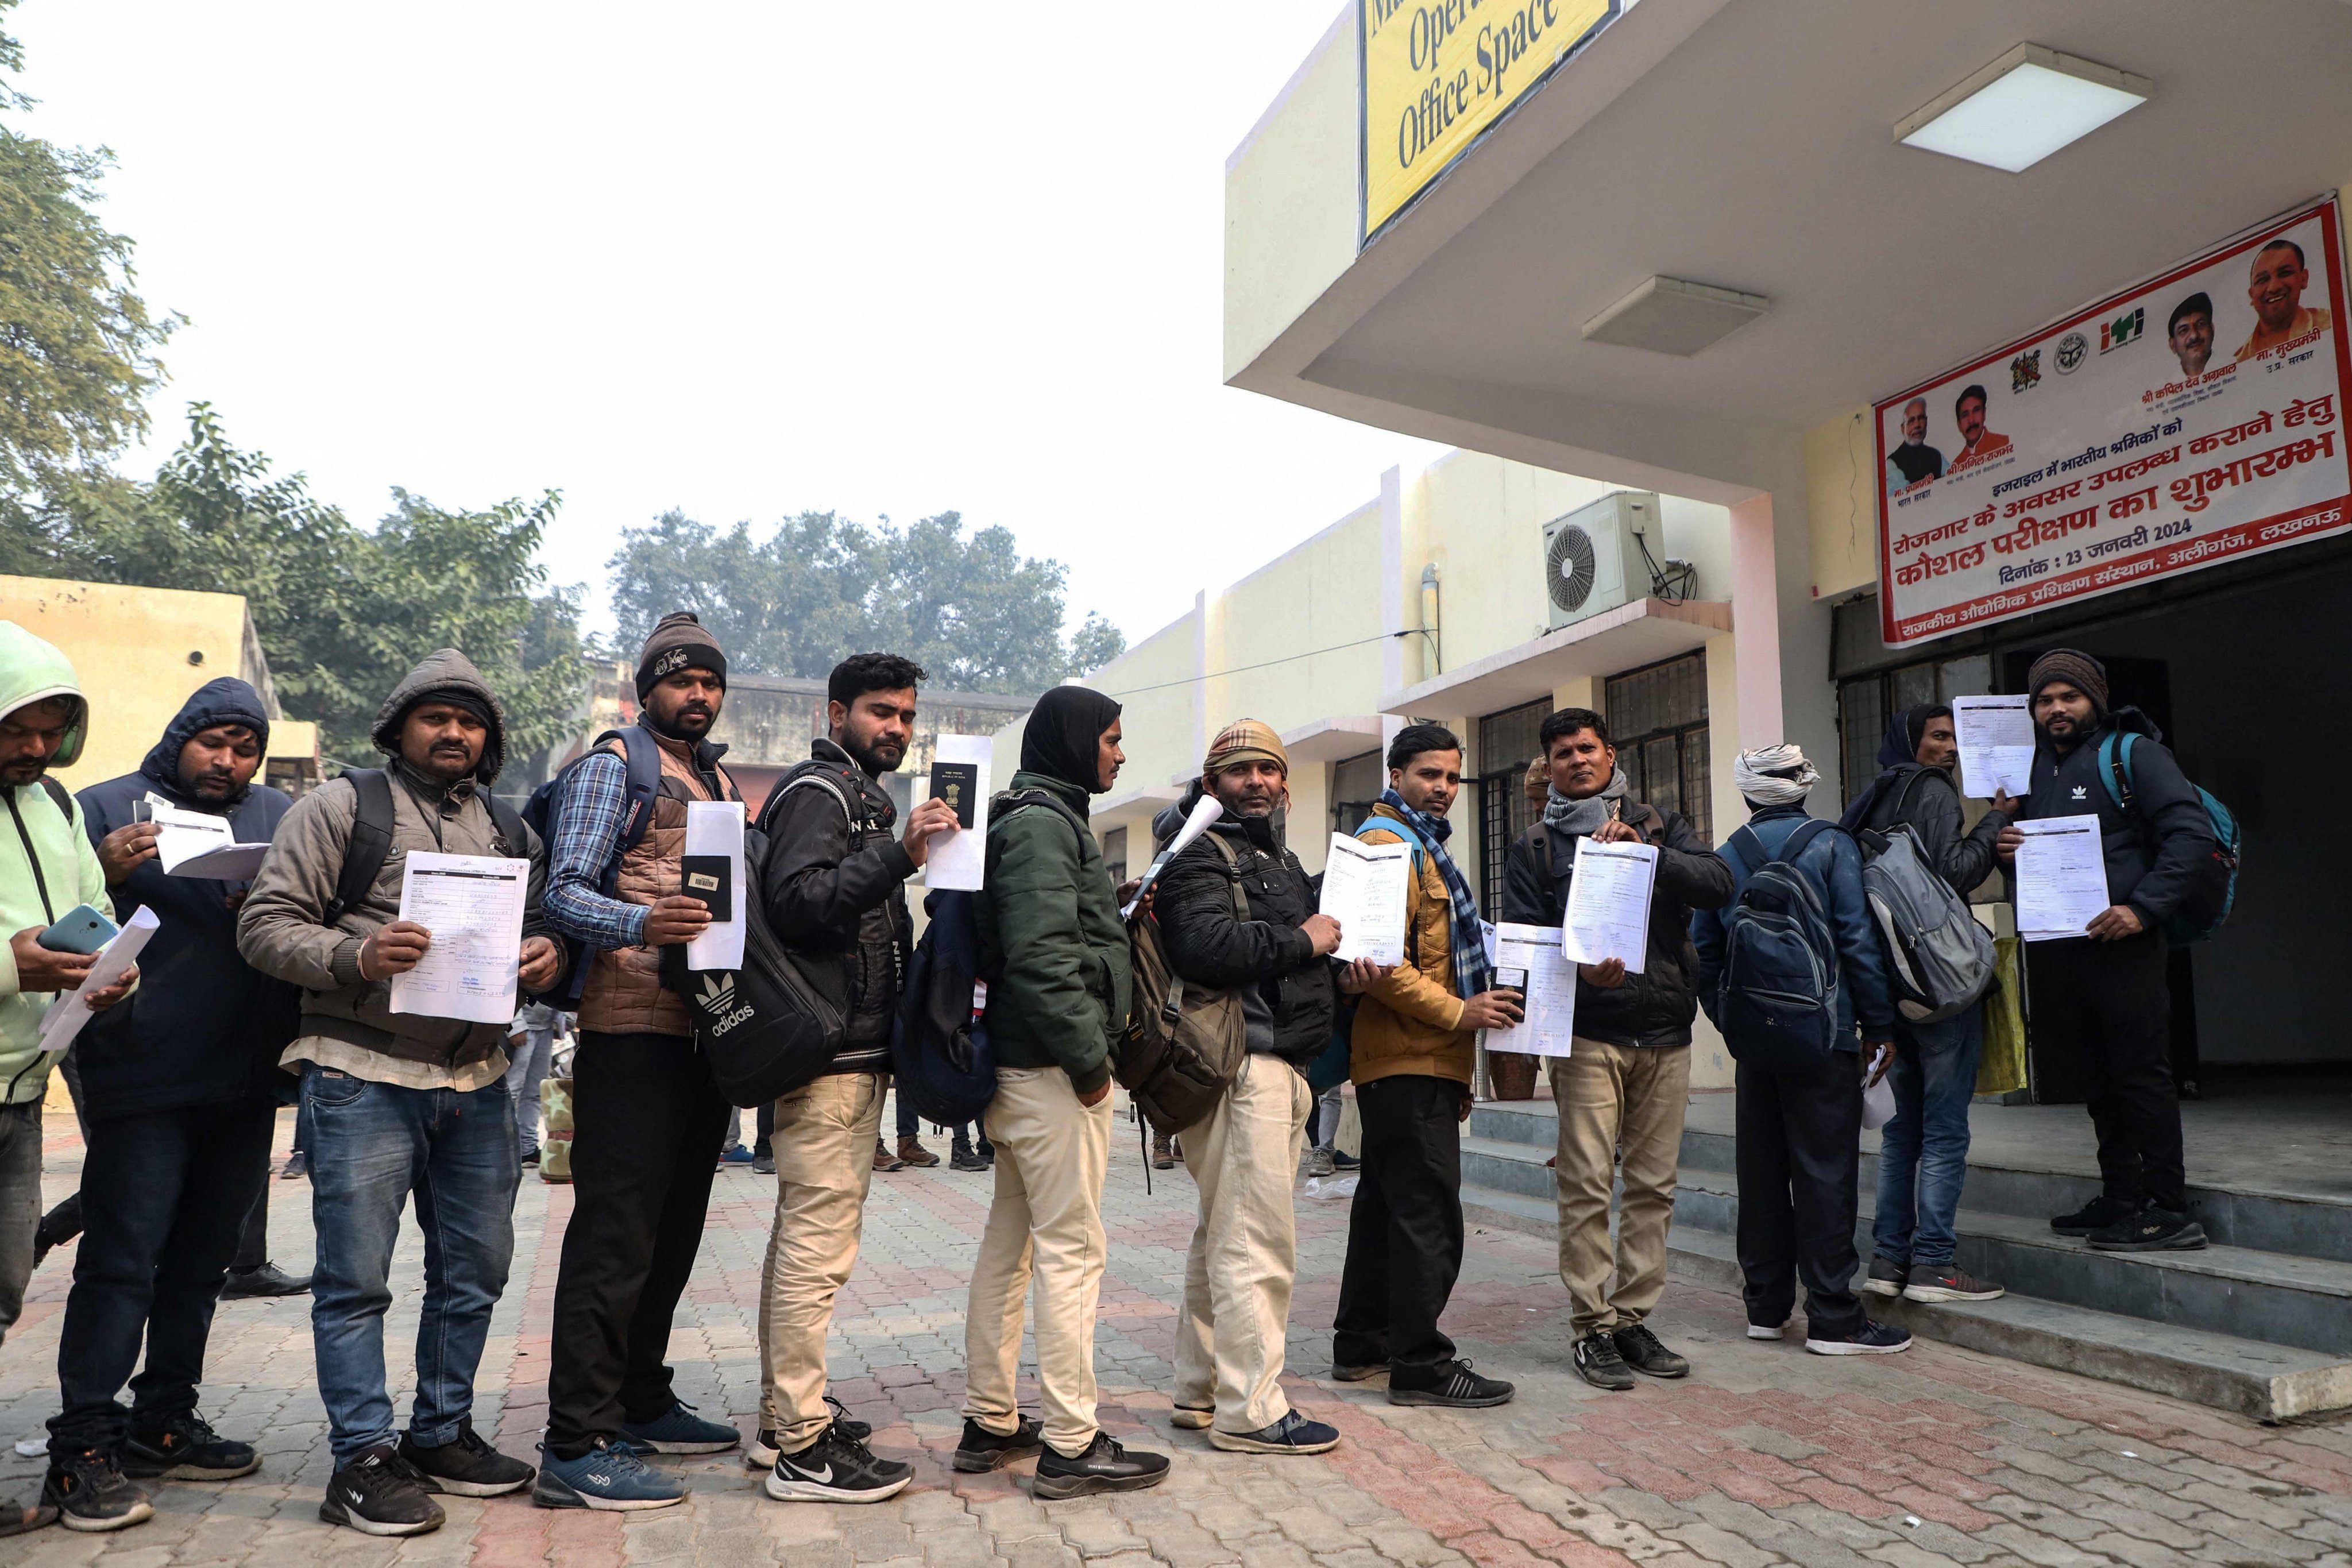 Indian workers wait to submit registration forms in Lucknow as they seek employment in Israel. Photo: AFP